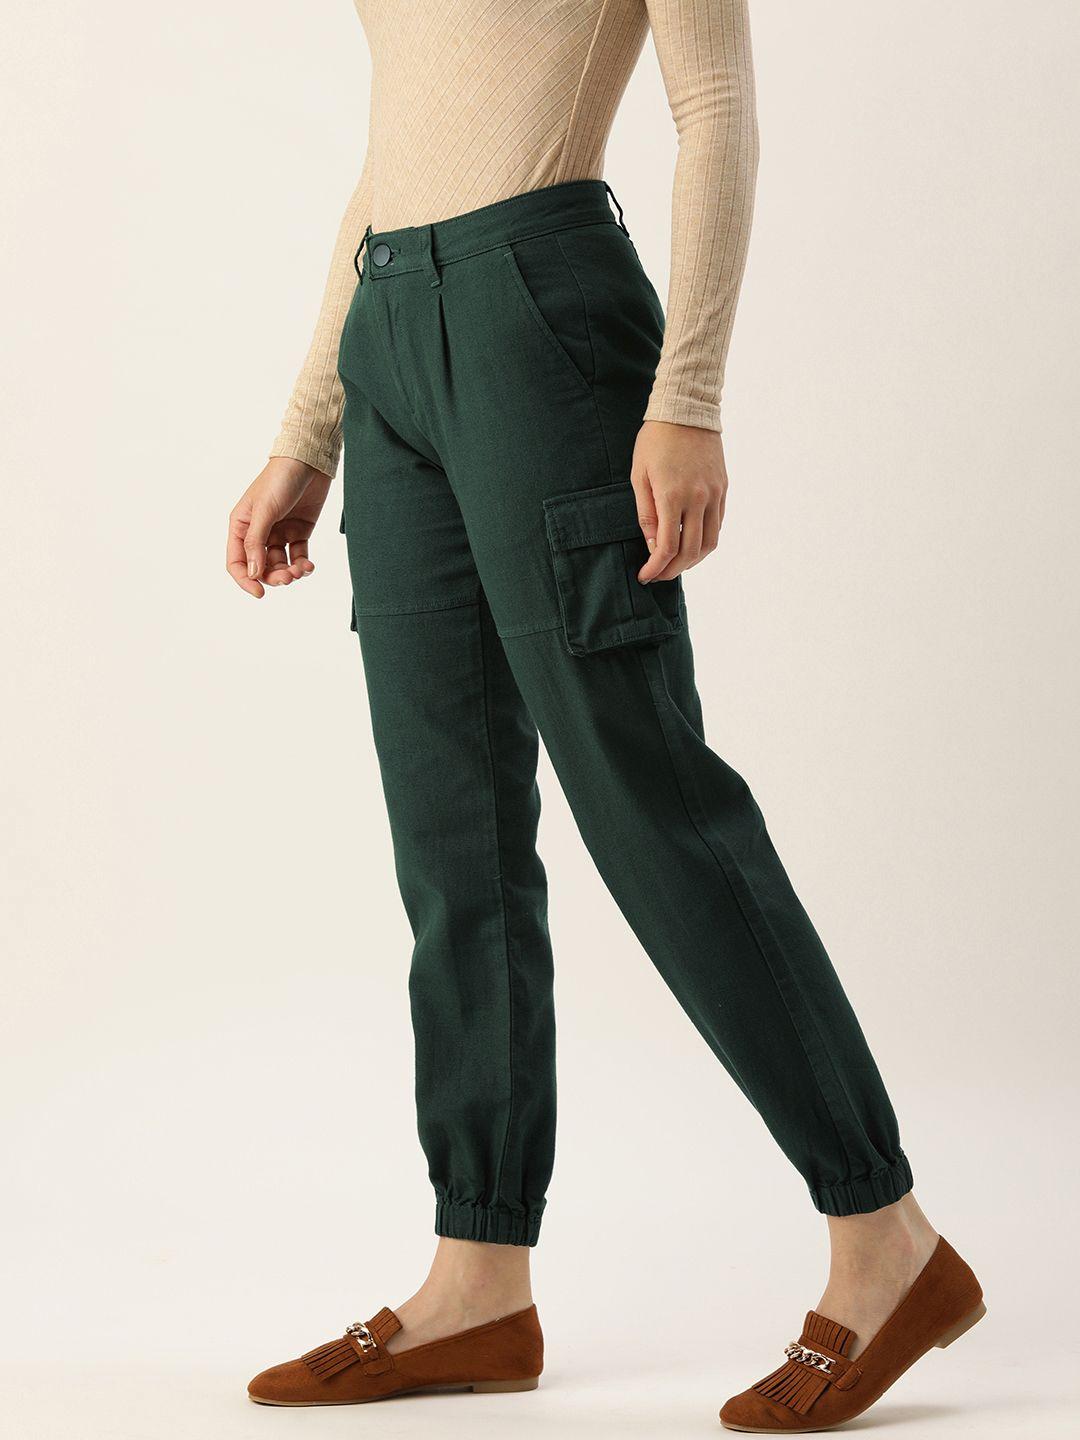 IVOC Women Olive Green Regular Fit Pleated Cotton Joggers Trousers